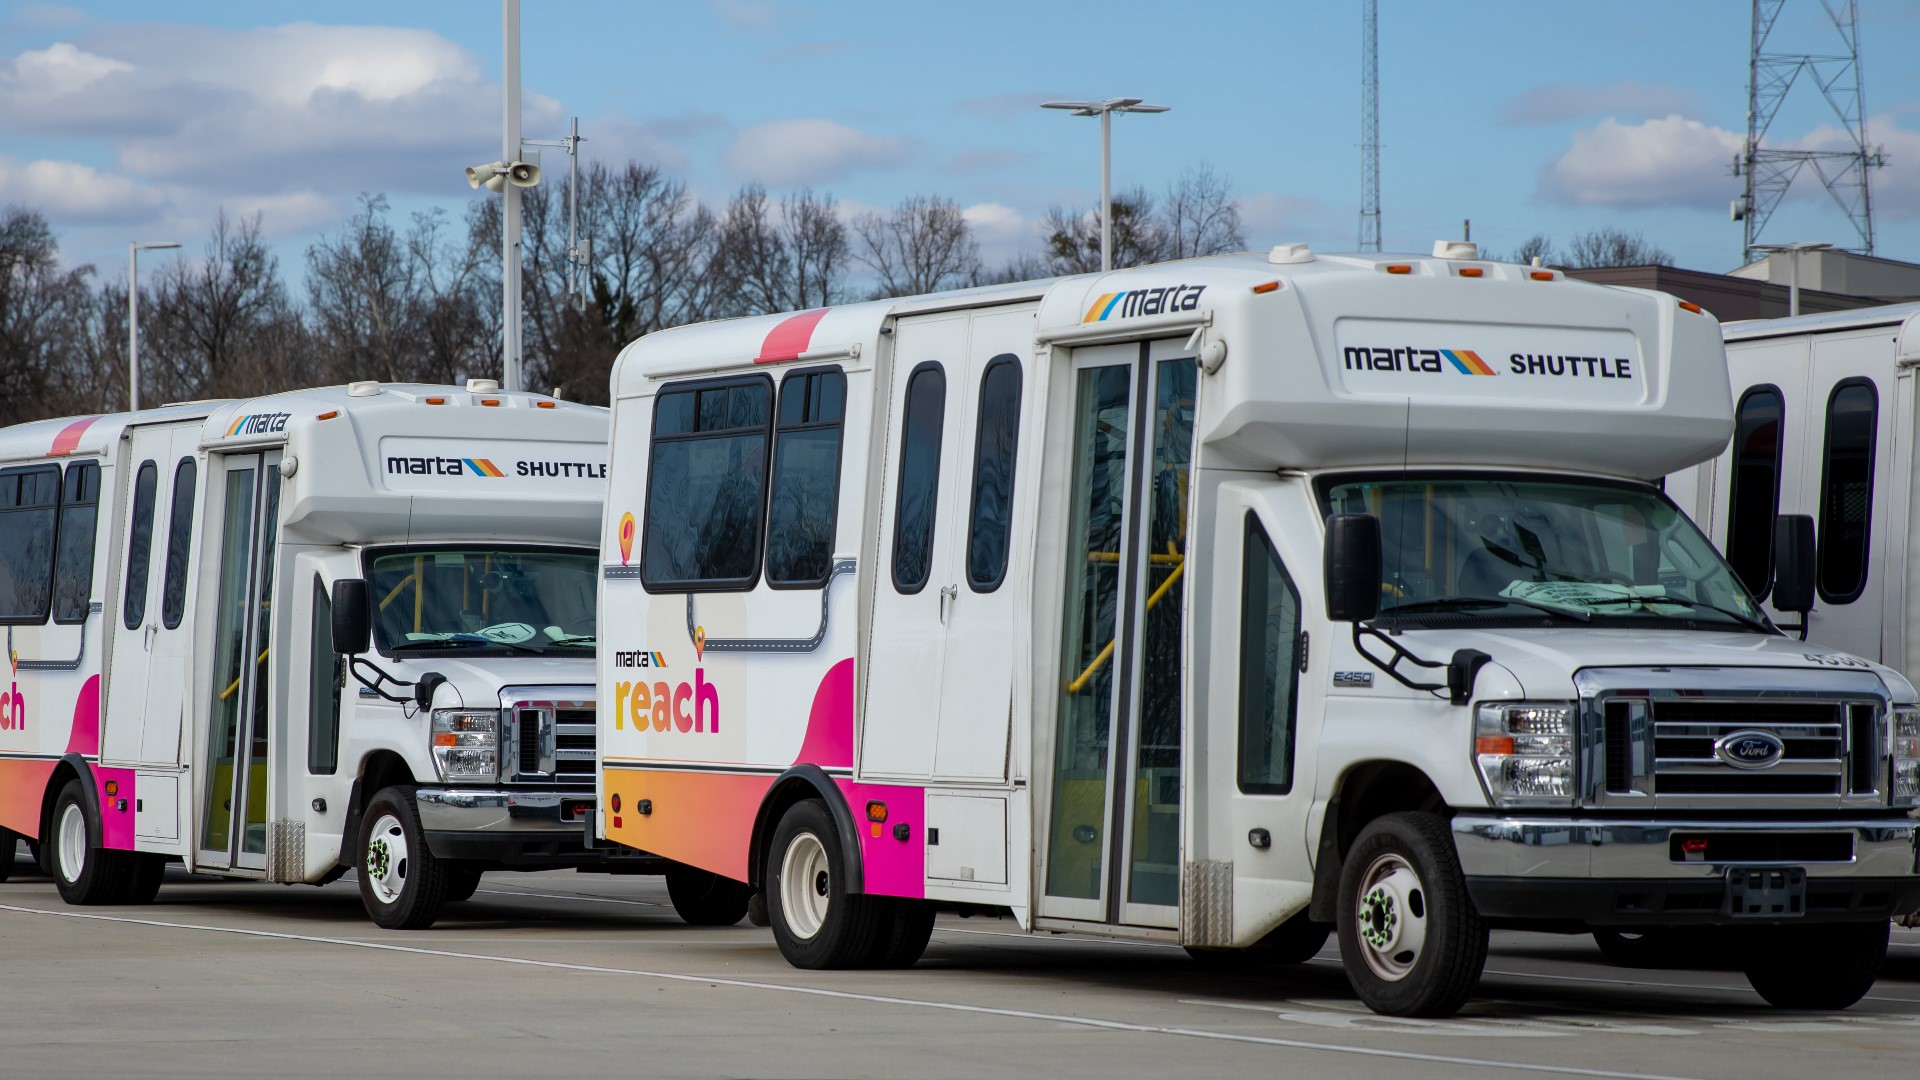 The rideshare pilot program will have the same standard MARTA fare, the transit authority said.